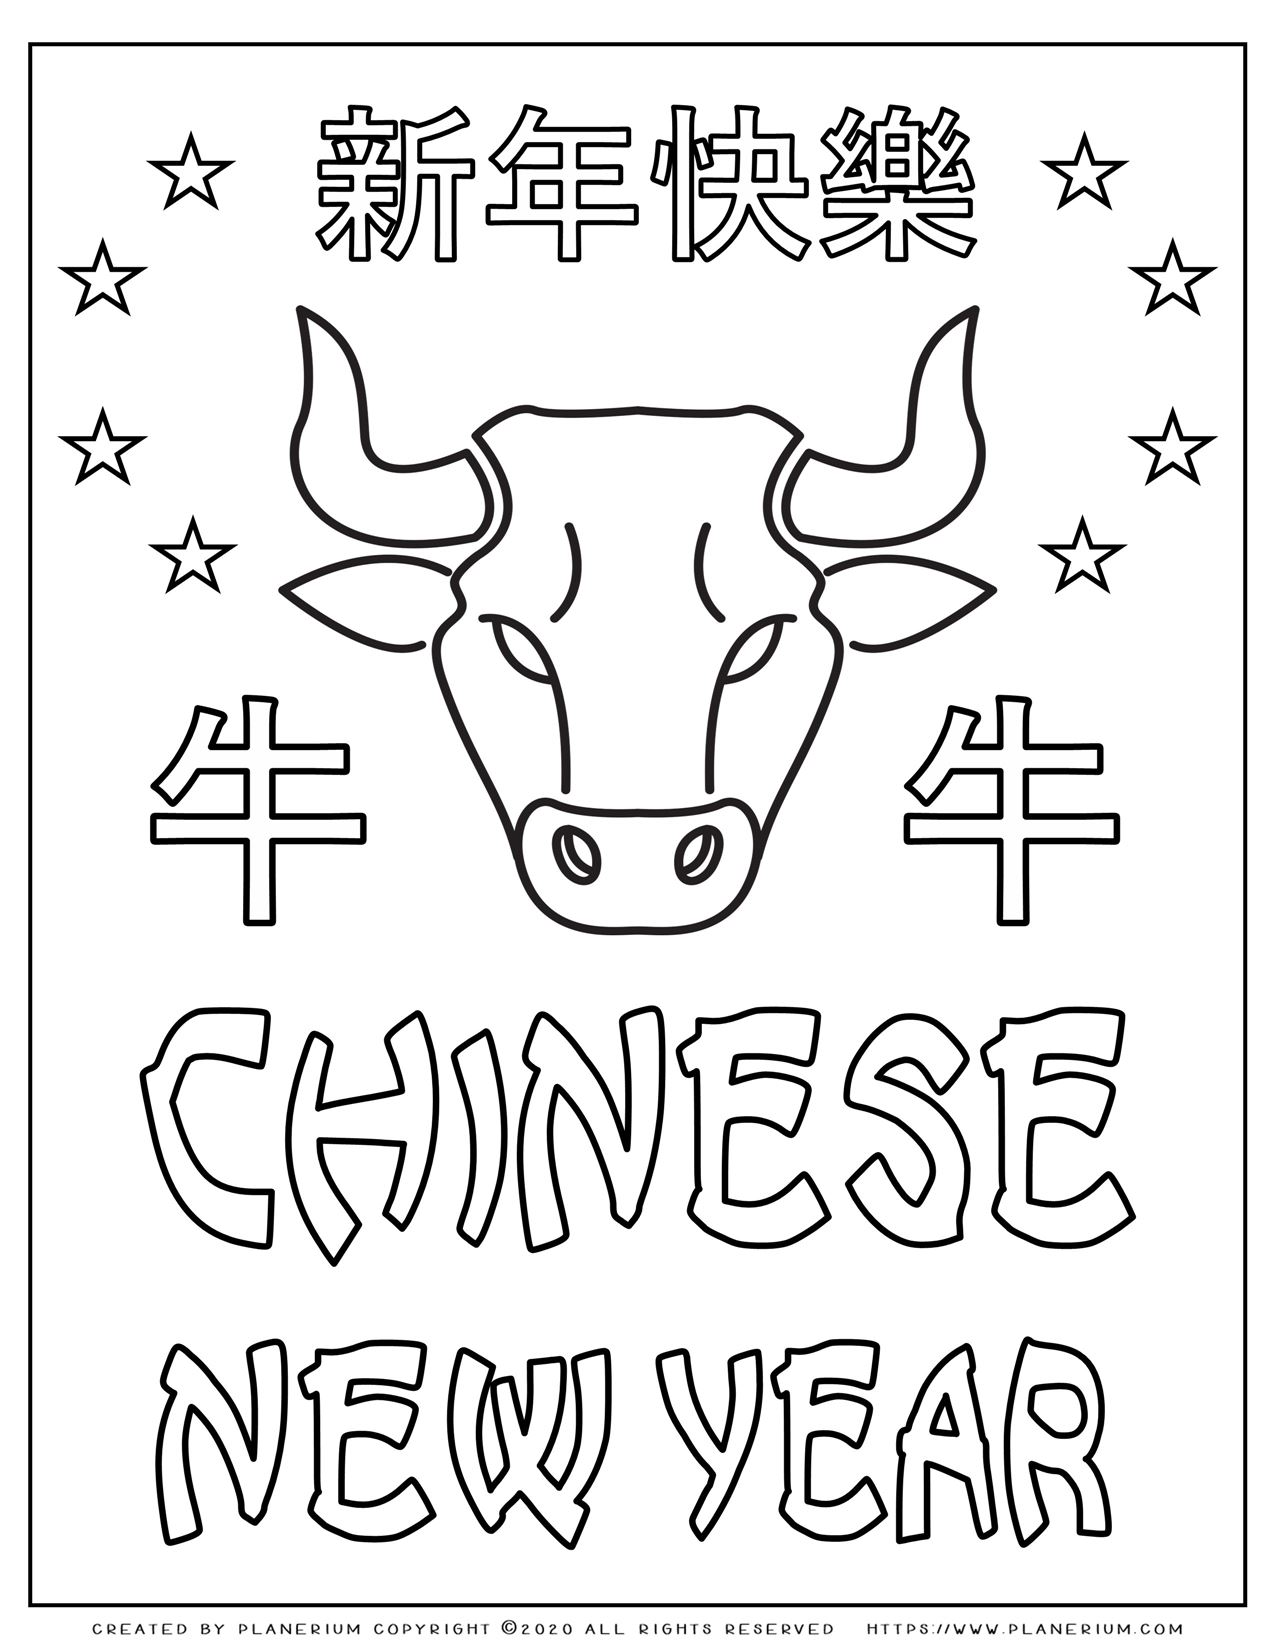 Download Chinese New Year 2021 - Free Coloring Page | Planerium